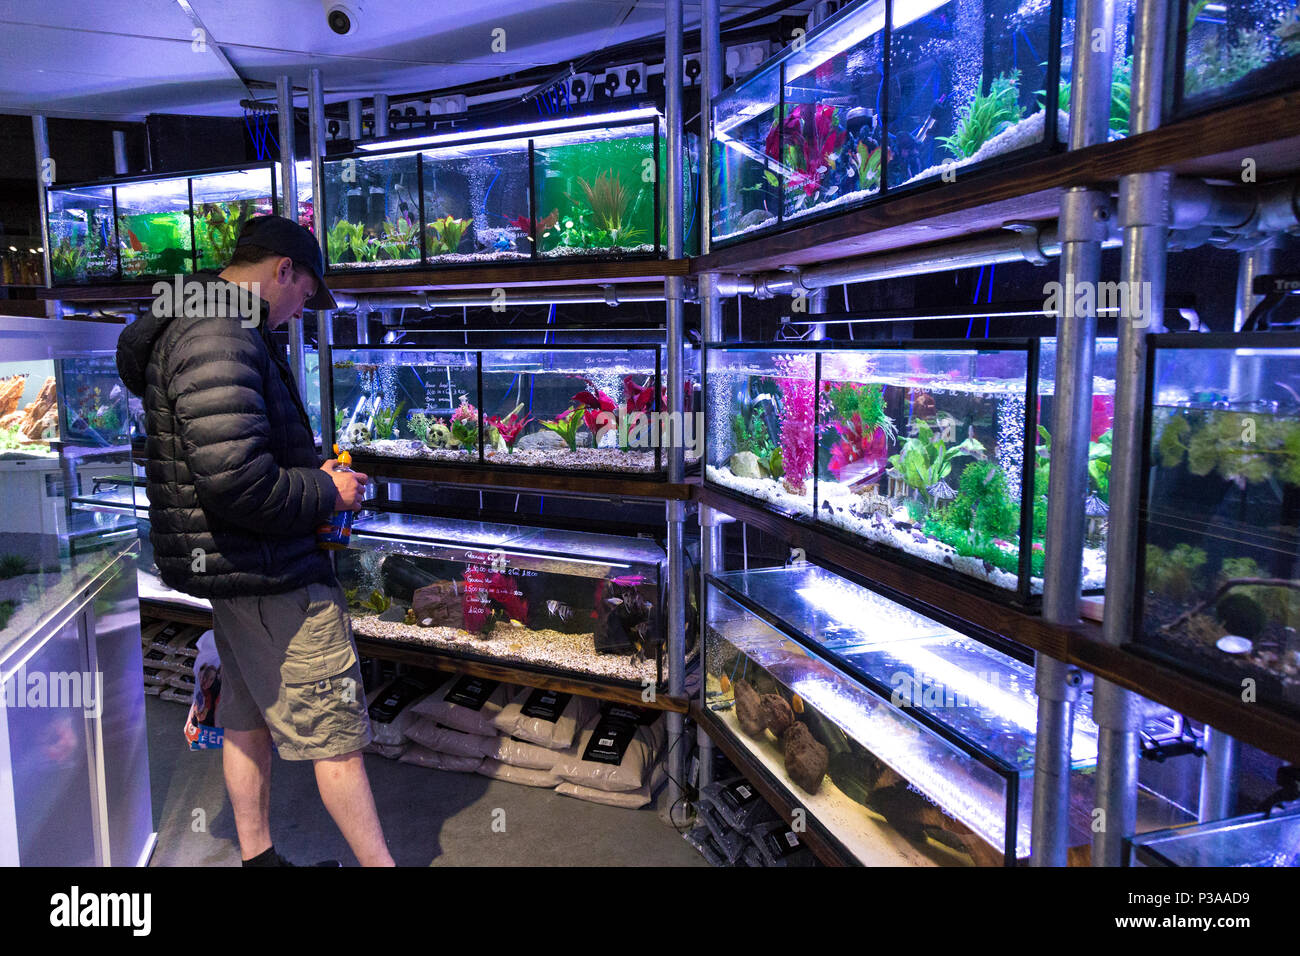 Customer looking at tanks fish inside of a pet shop, Manchester, UK Stock Photo